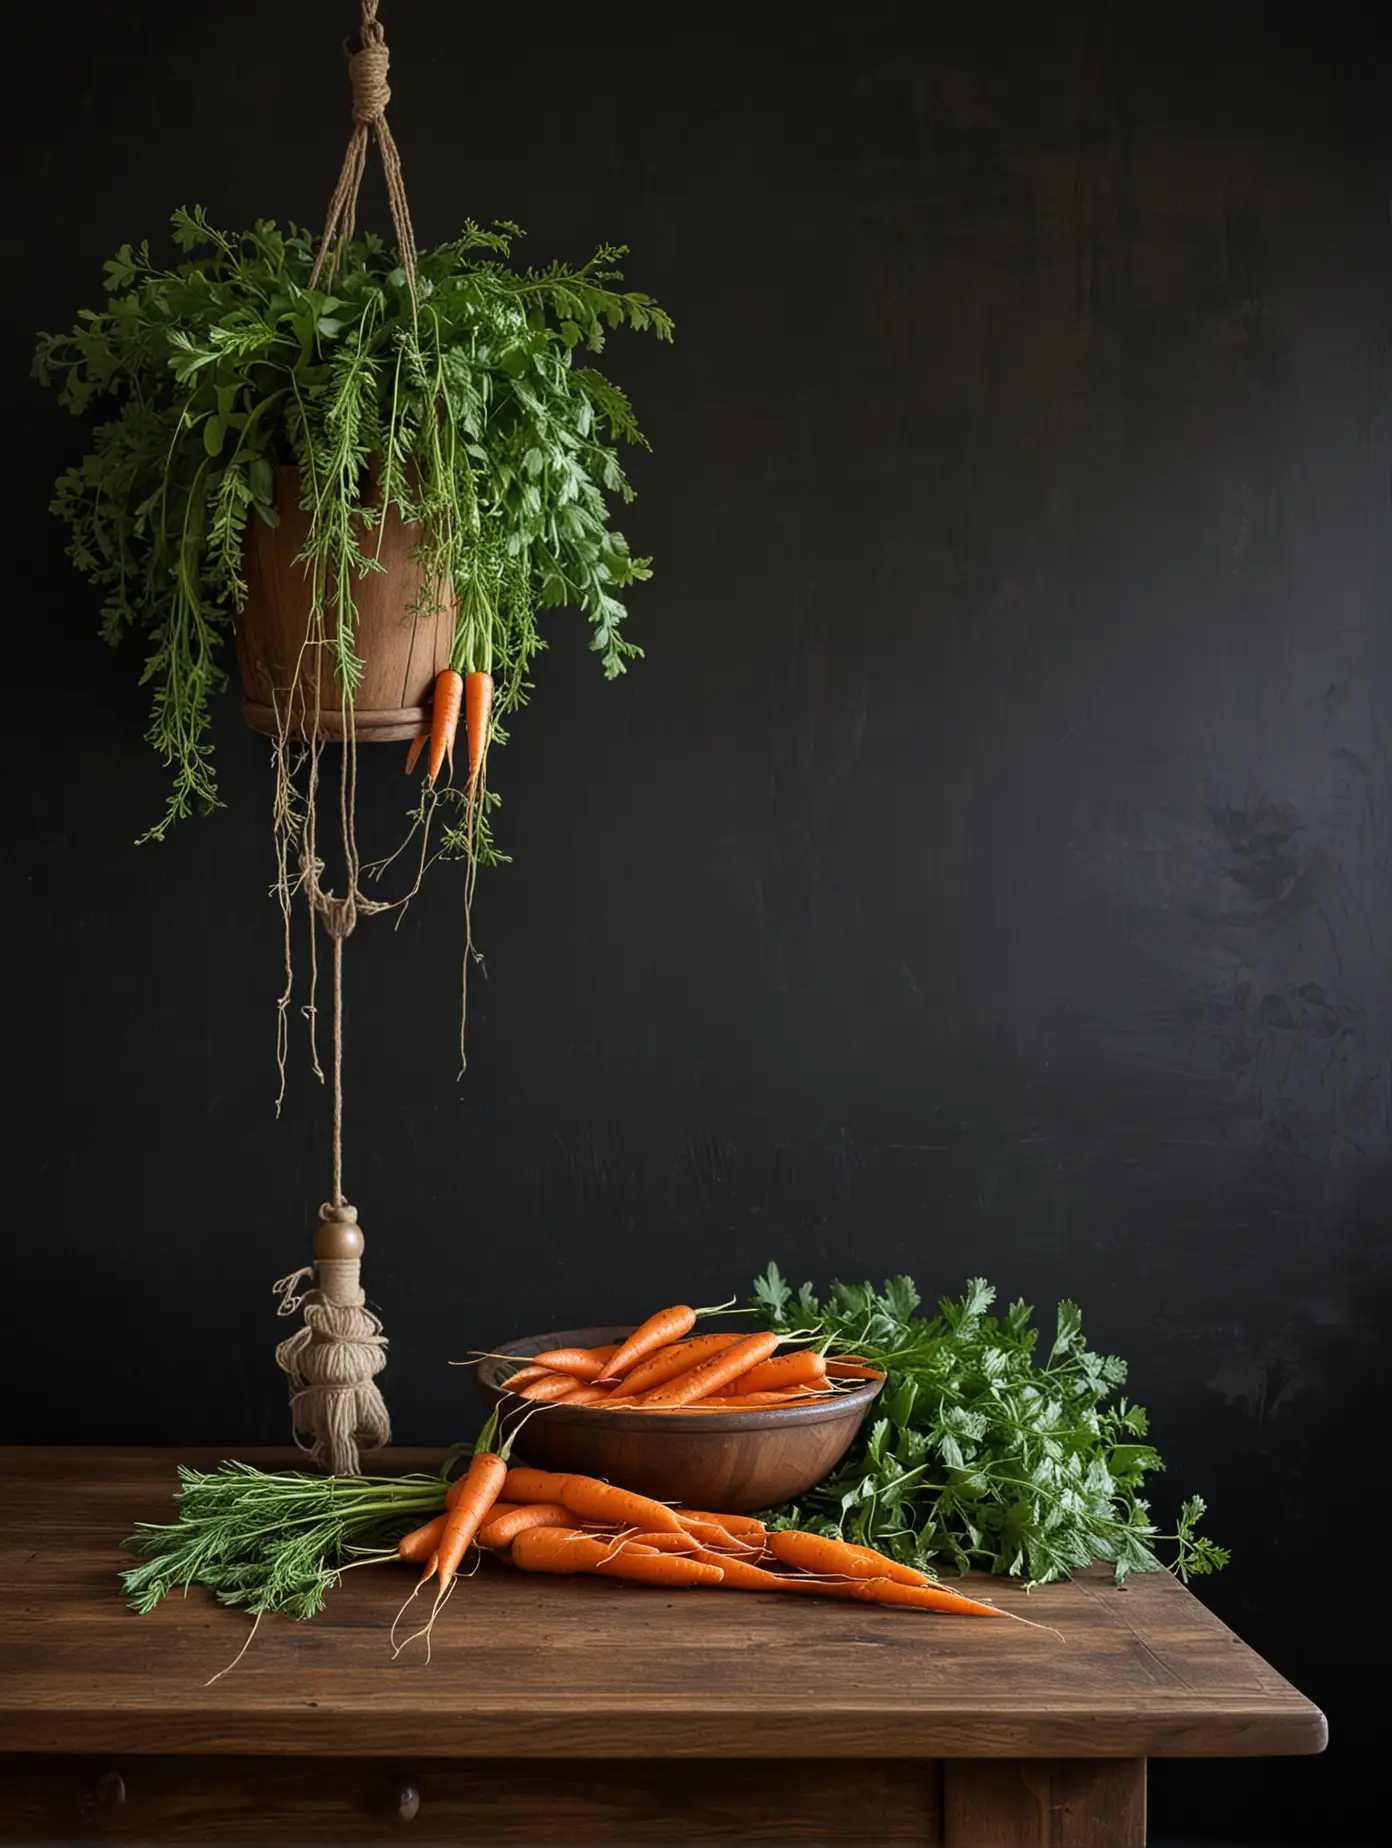 Vintage Mission Table with Carrots and Greenery Decoration